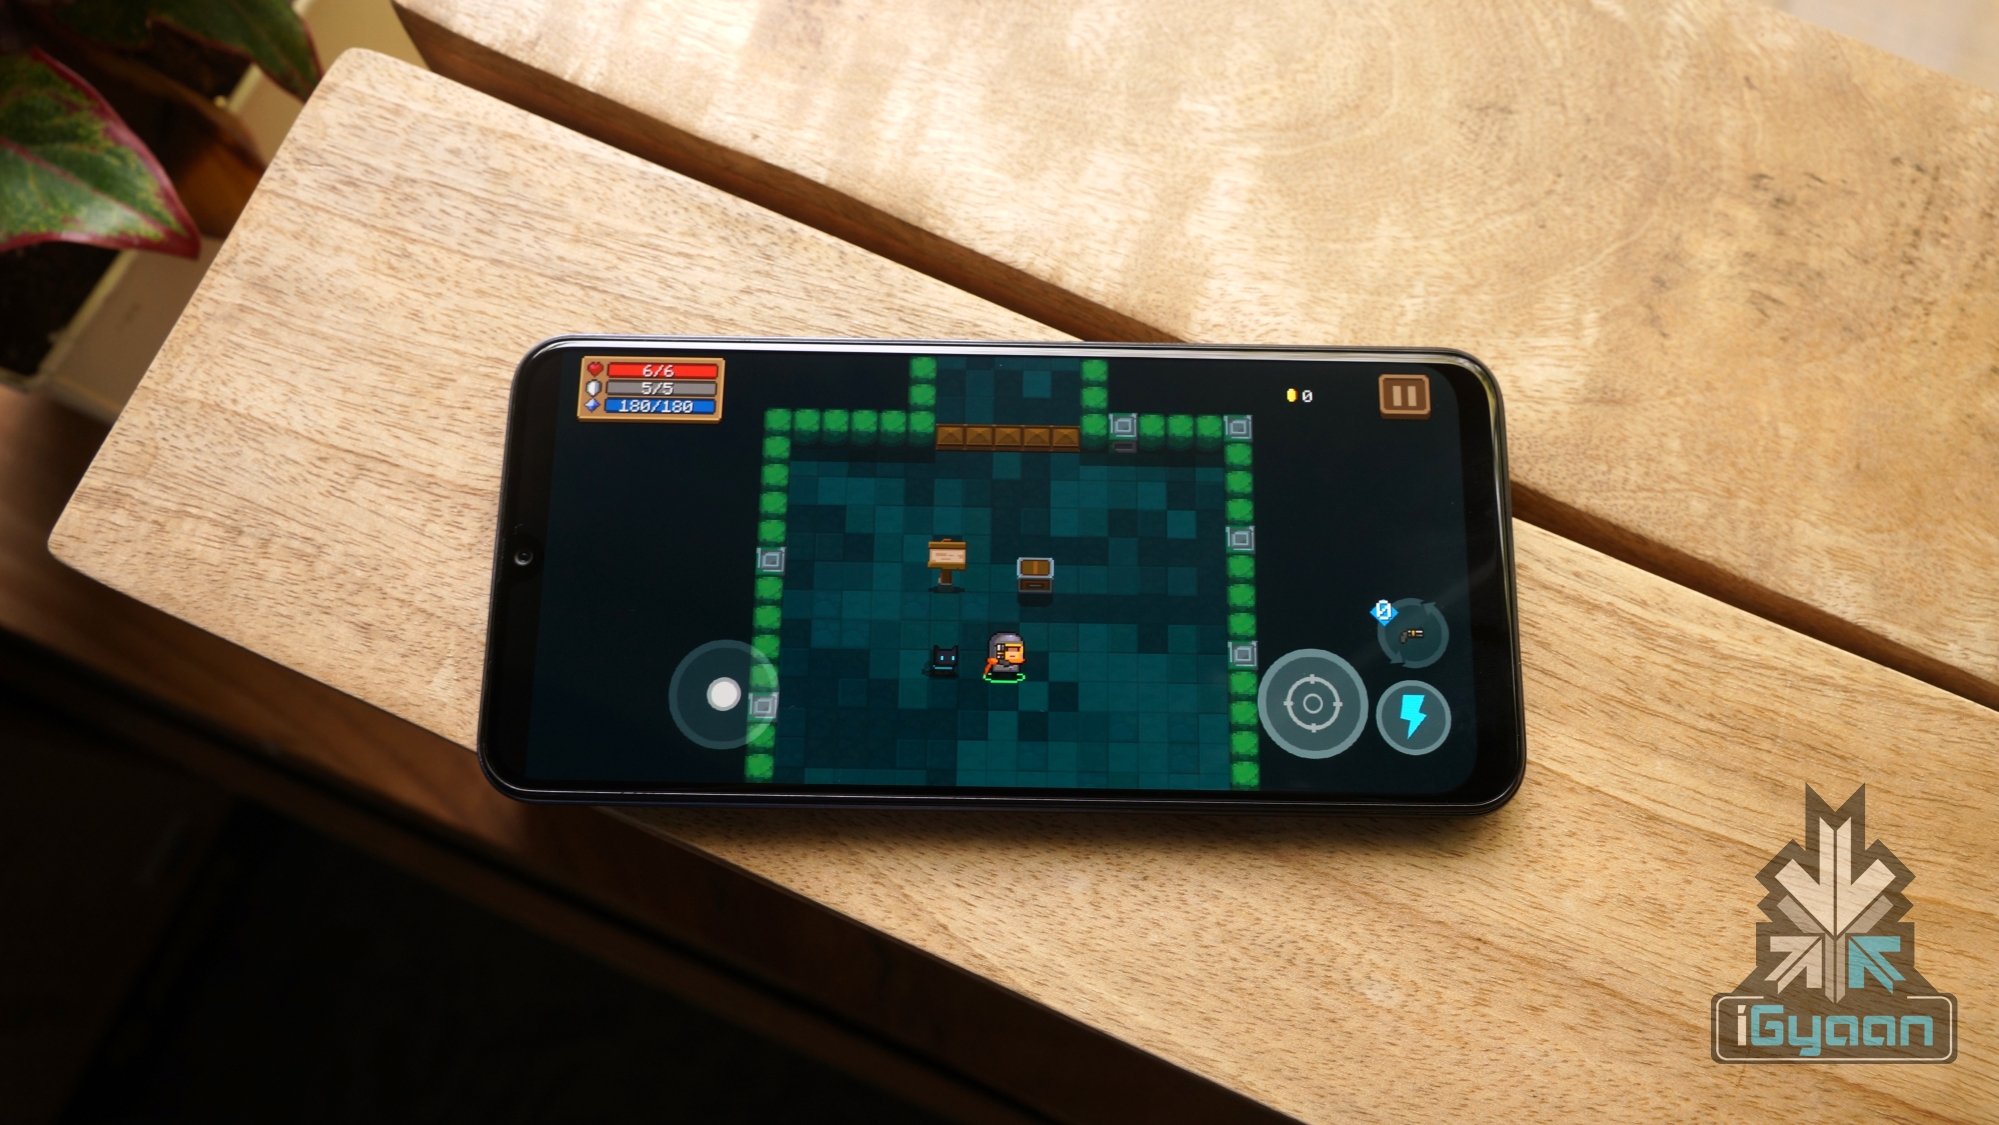 Top 5 Free Android Games